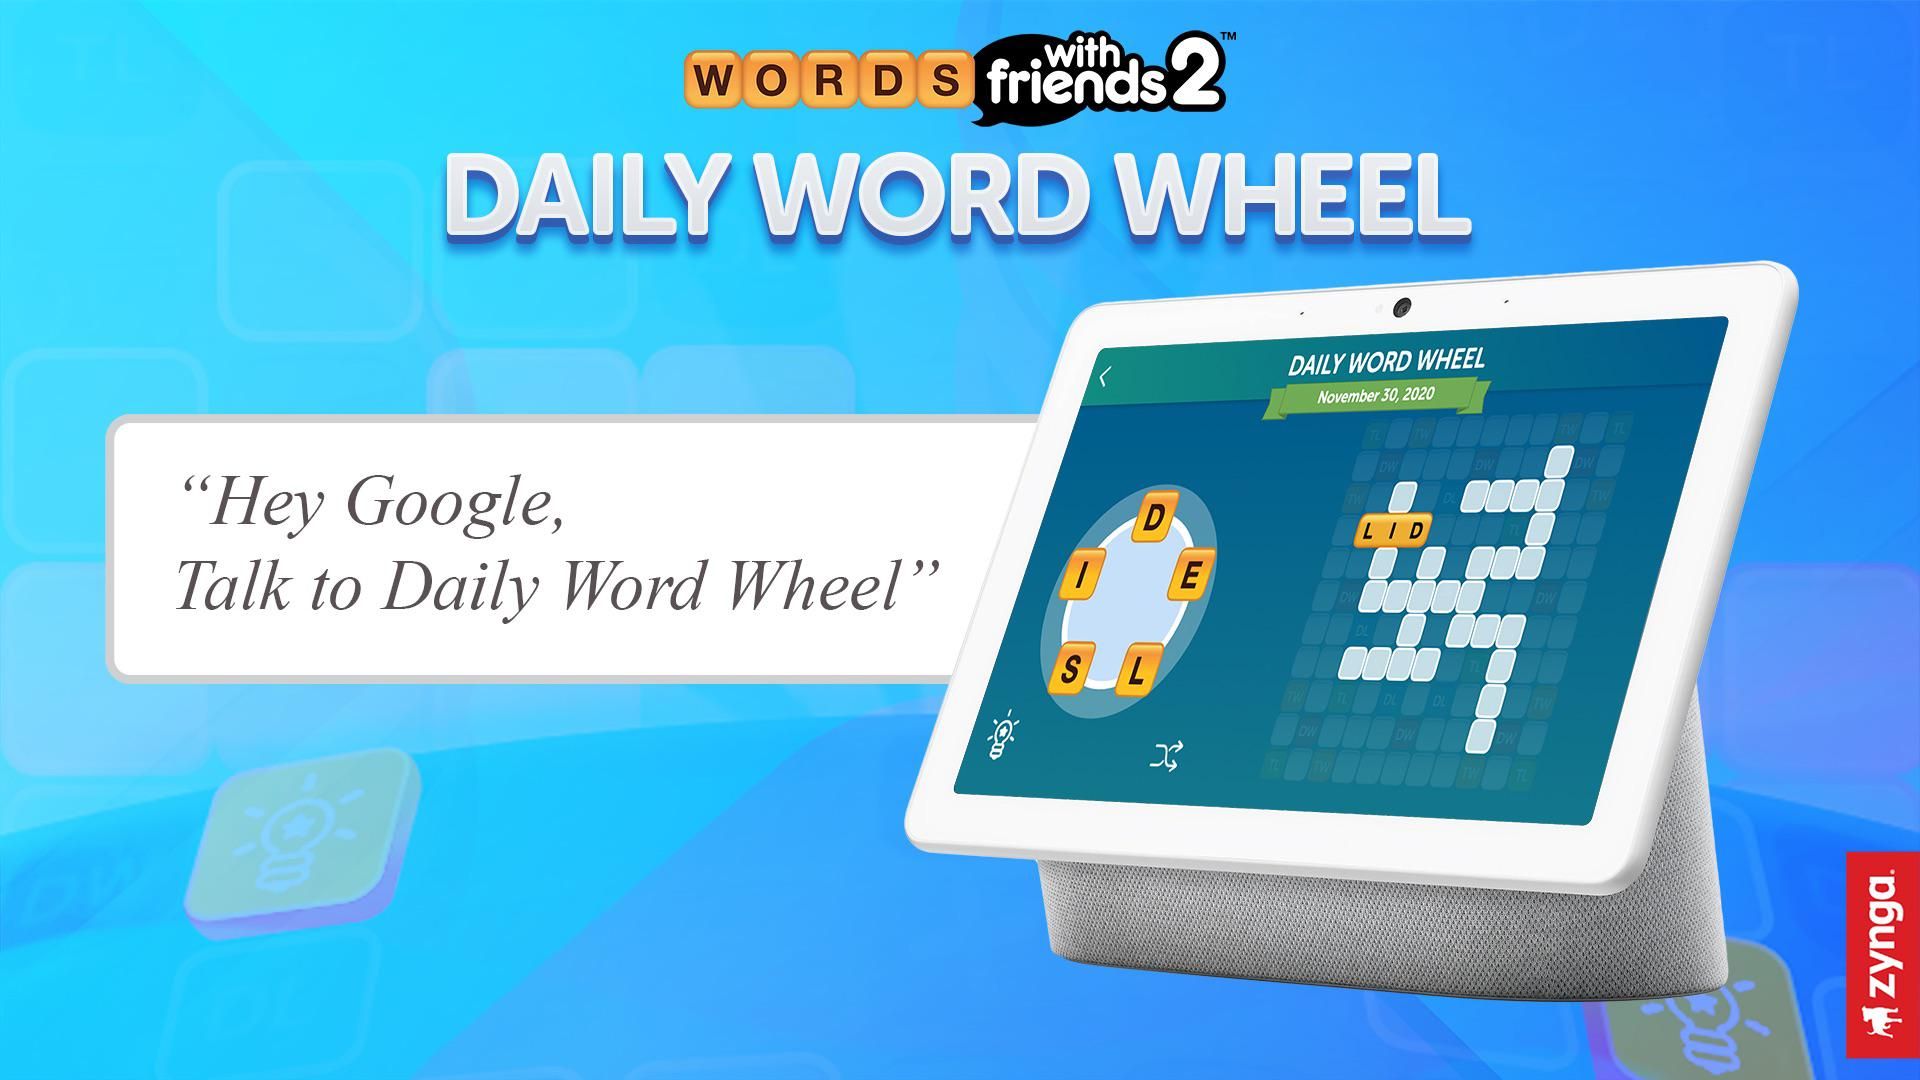 Daily Word Wheel game on Google Nest display